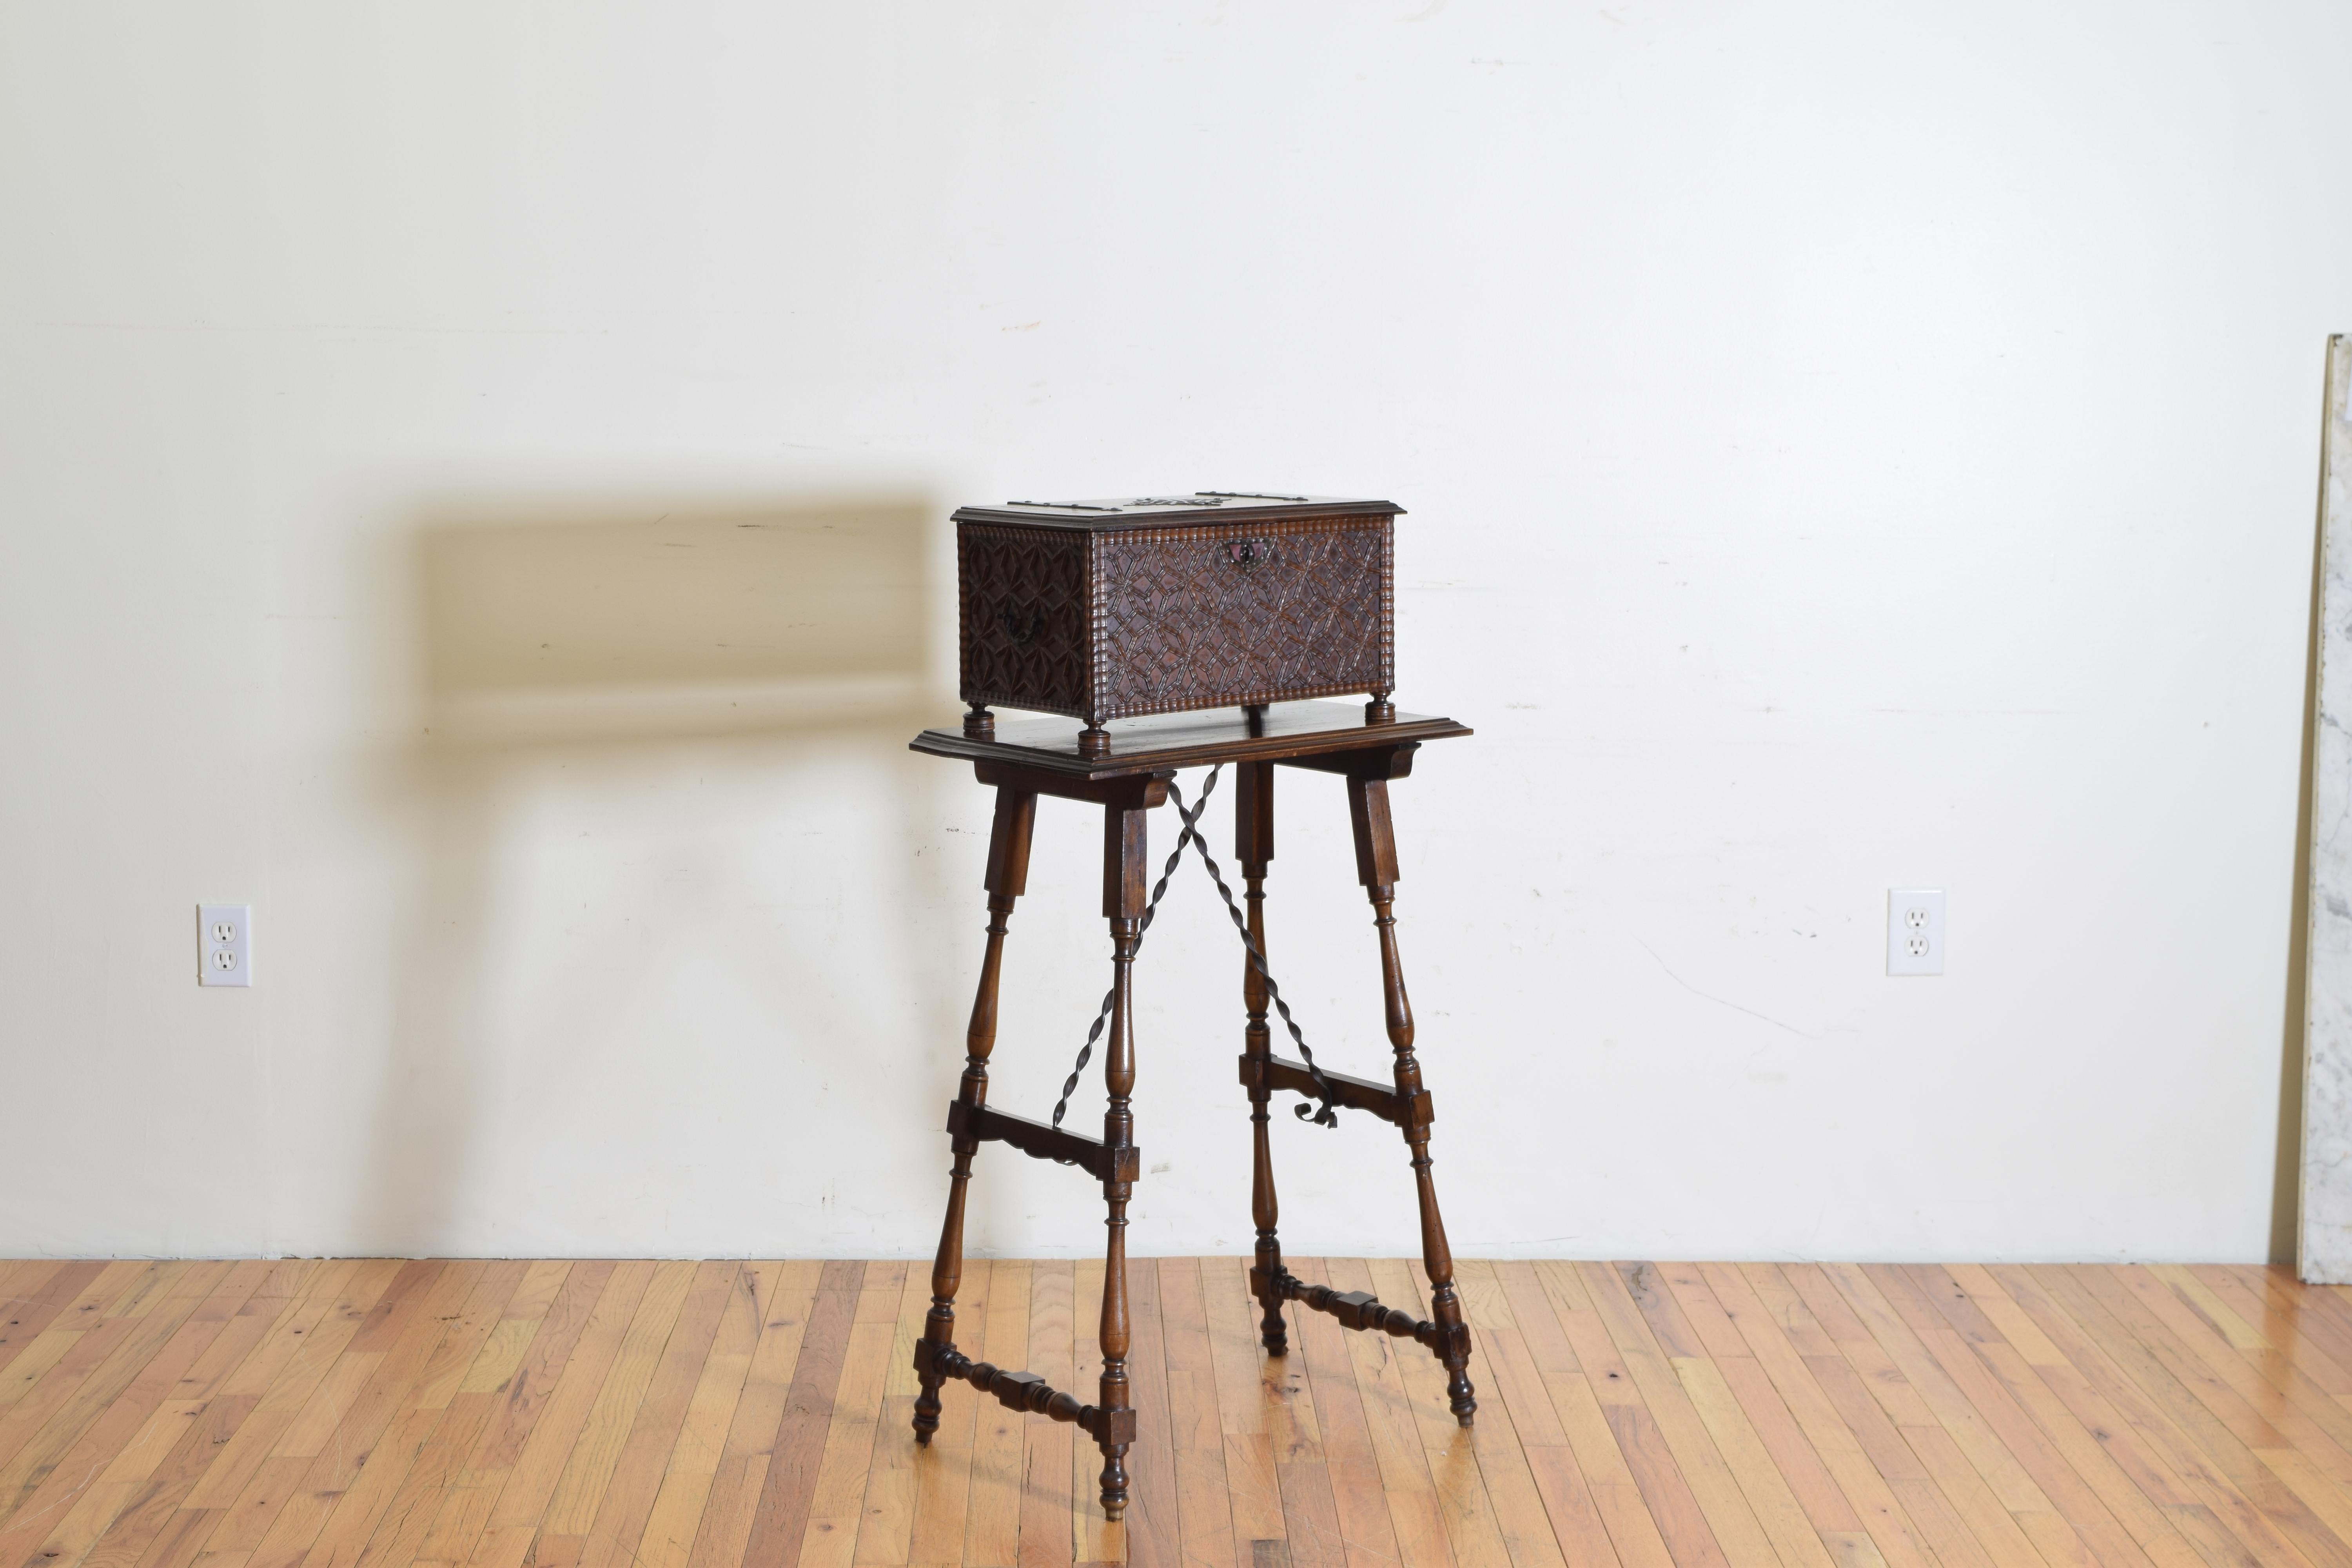 The box with intricate applied carvings and a gadrooned carved molded edge with iron hinges and a centered medallion raised on round flattened disk feet, the tall stand with turned legs joined by wooden and iron stretchers, first quarter of the 20th